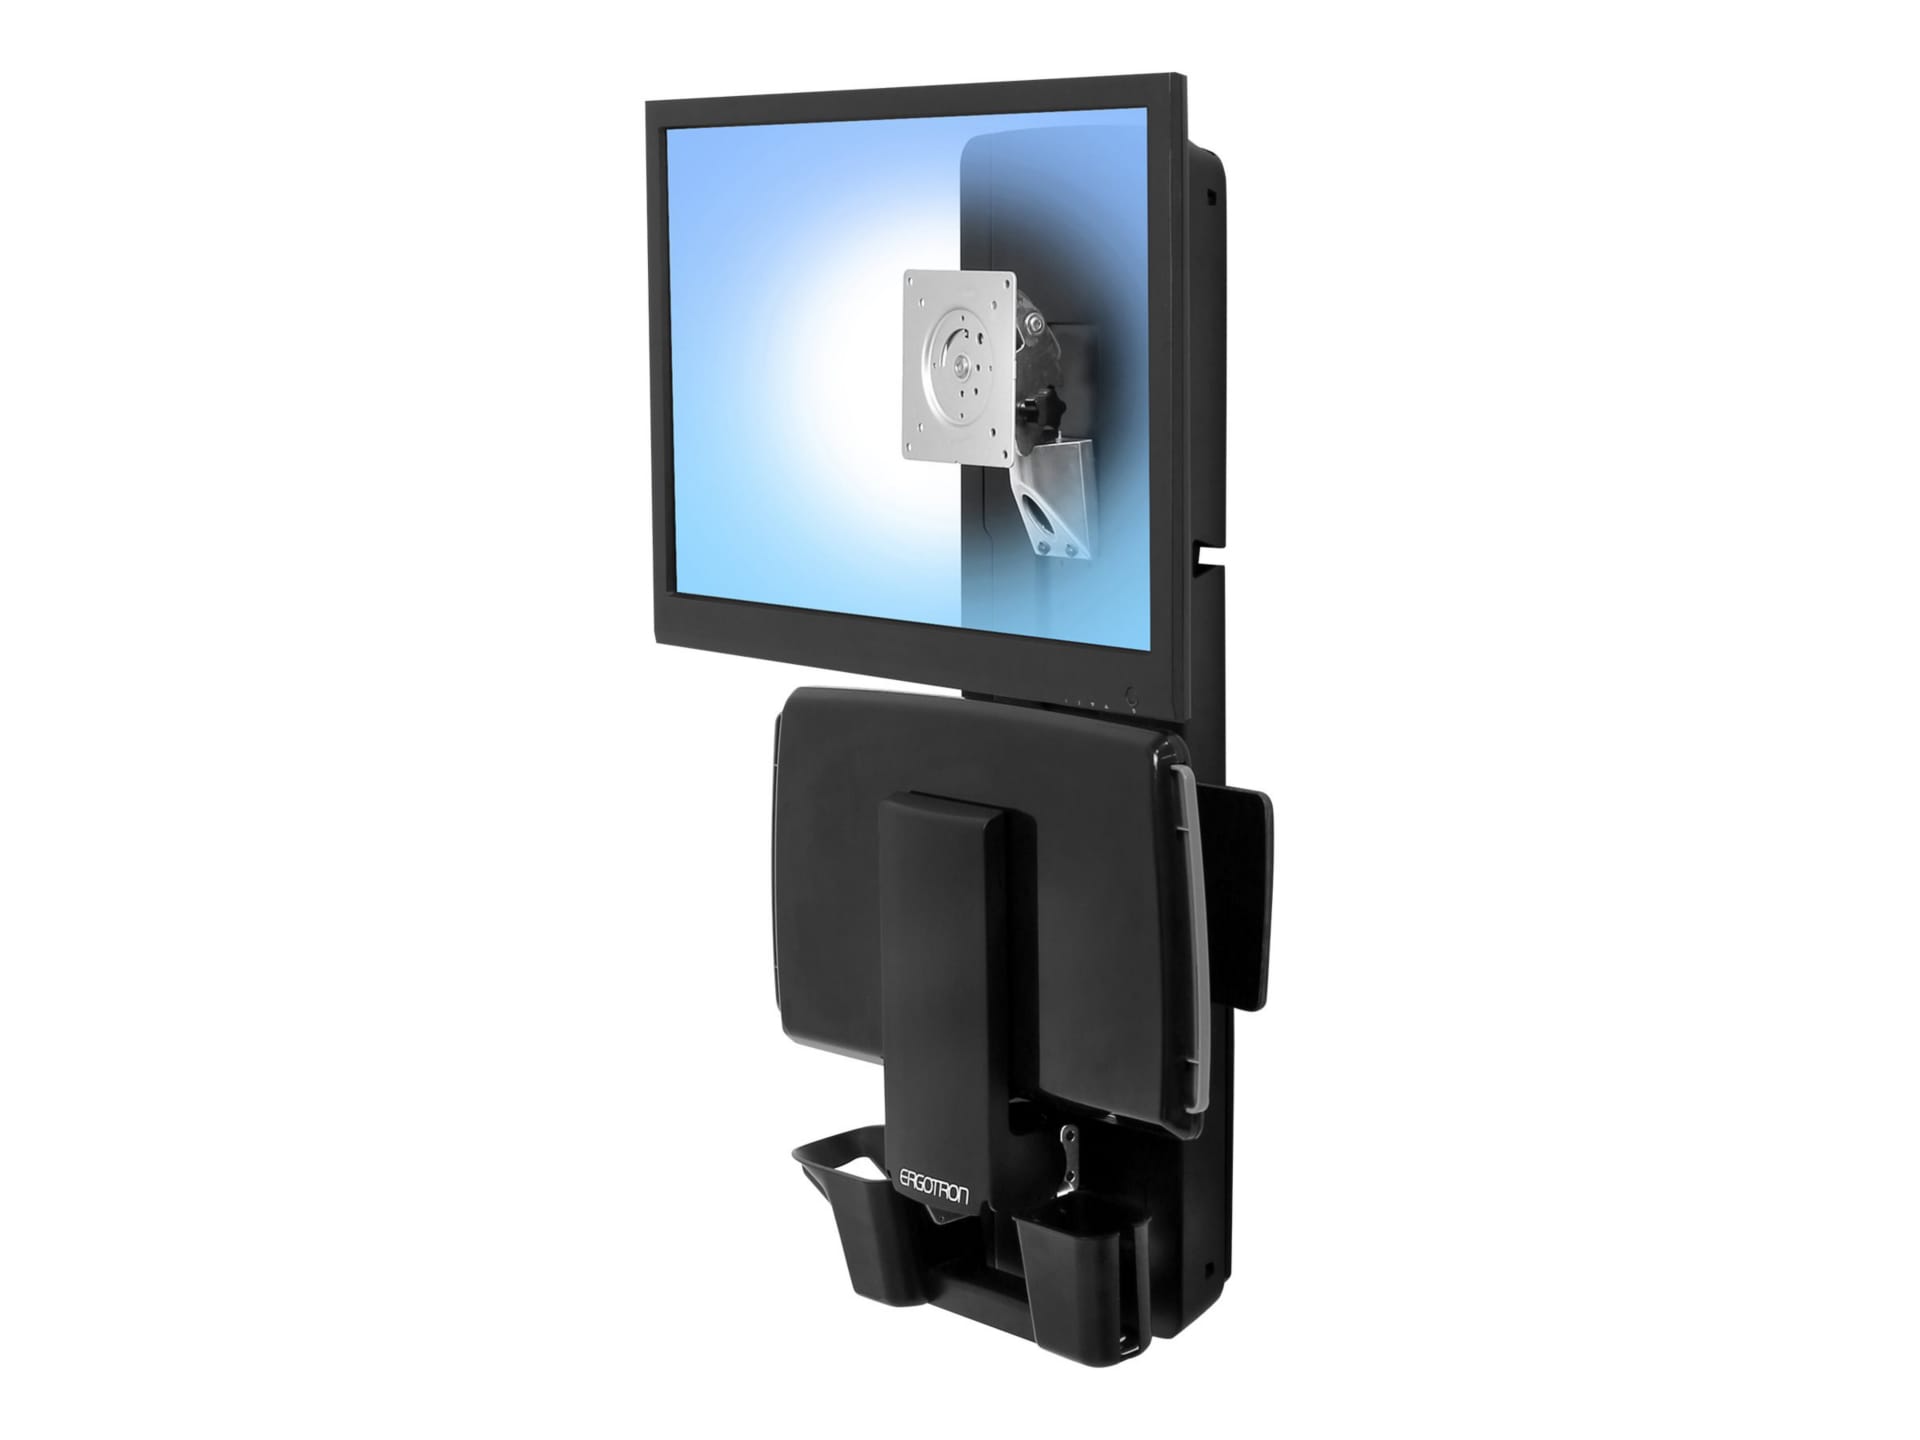 Ergotron StyleView Sit-Stand Vertical Lift, Patient Room mounting kit - for